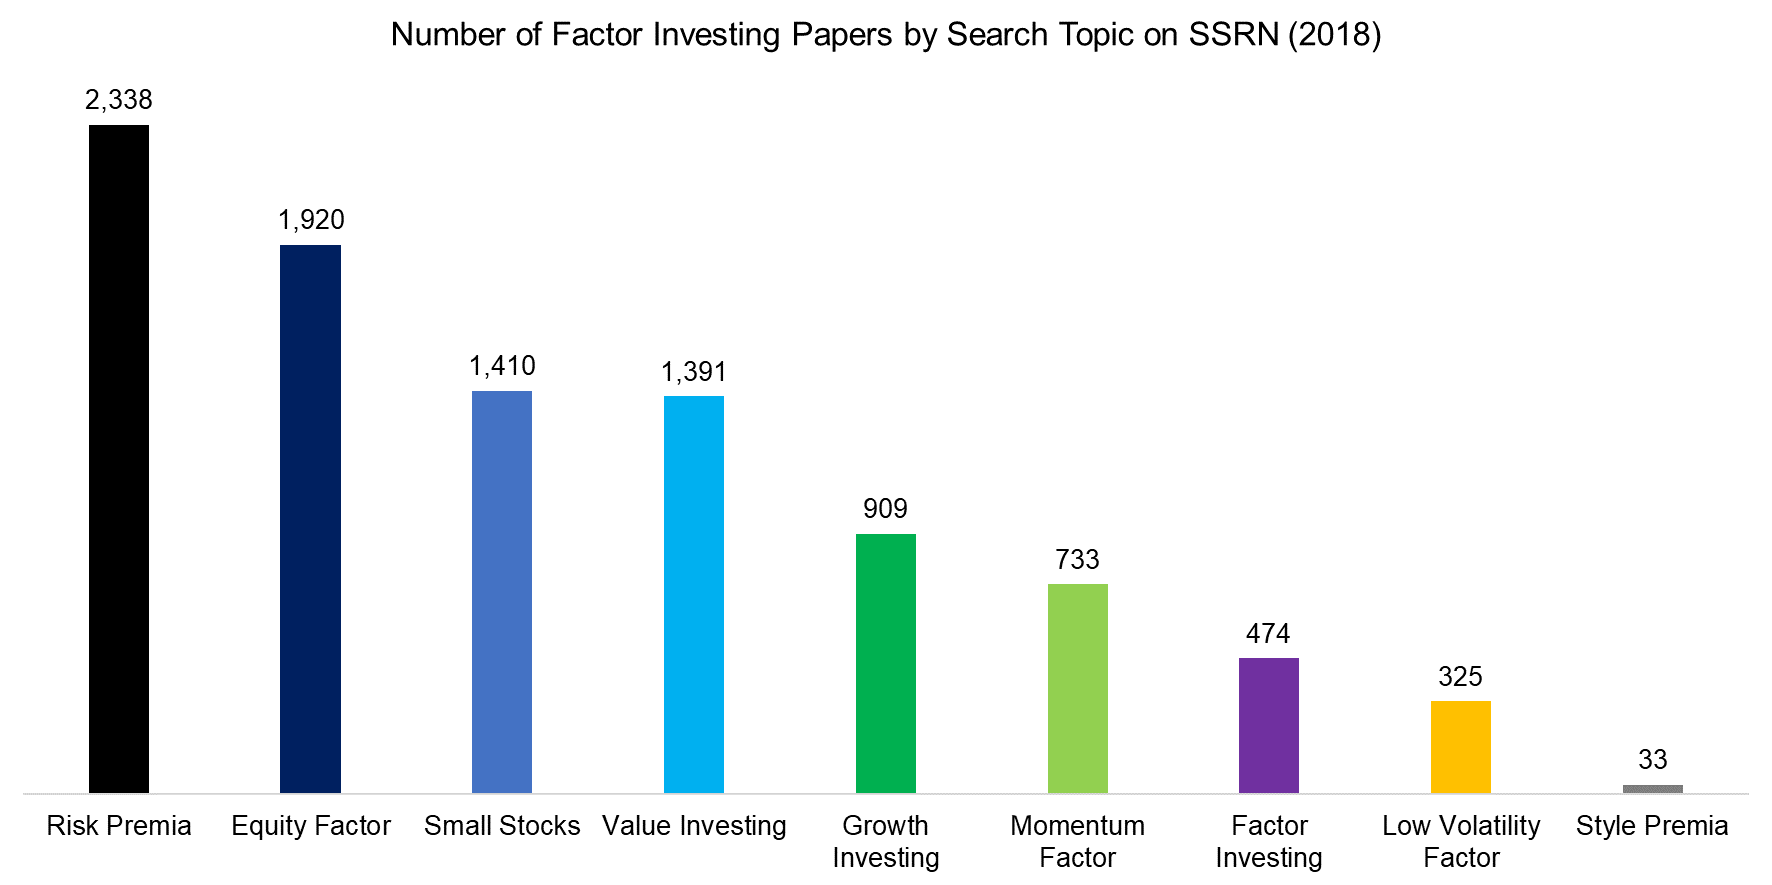 Number of Factor Investing Papers by Search Topic on SSRN (2018)